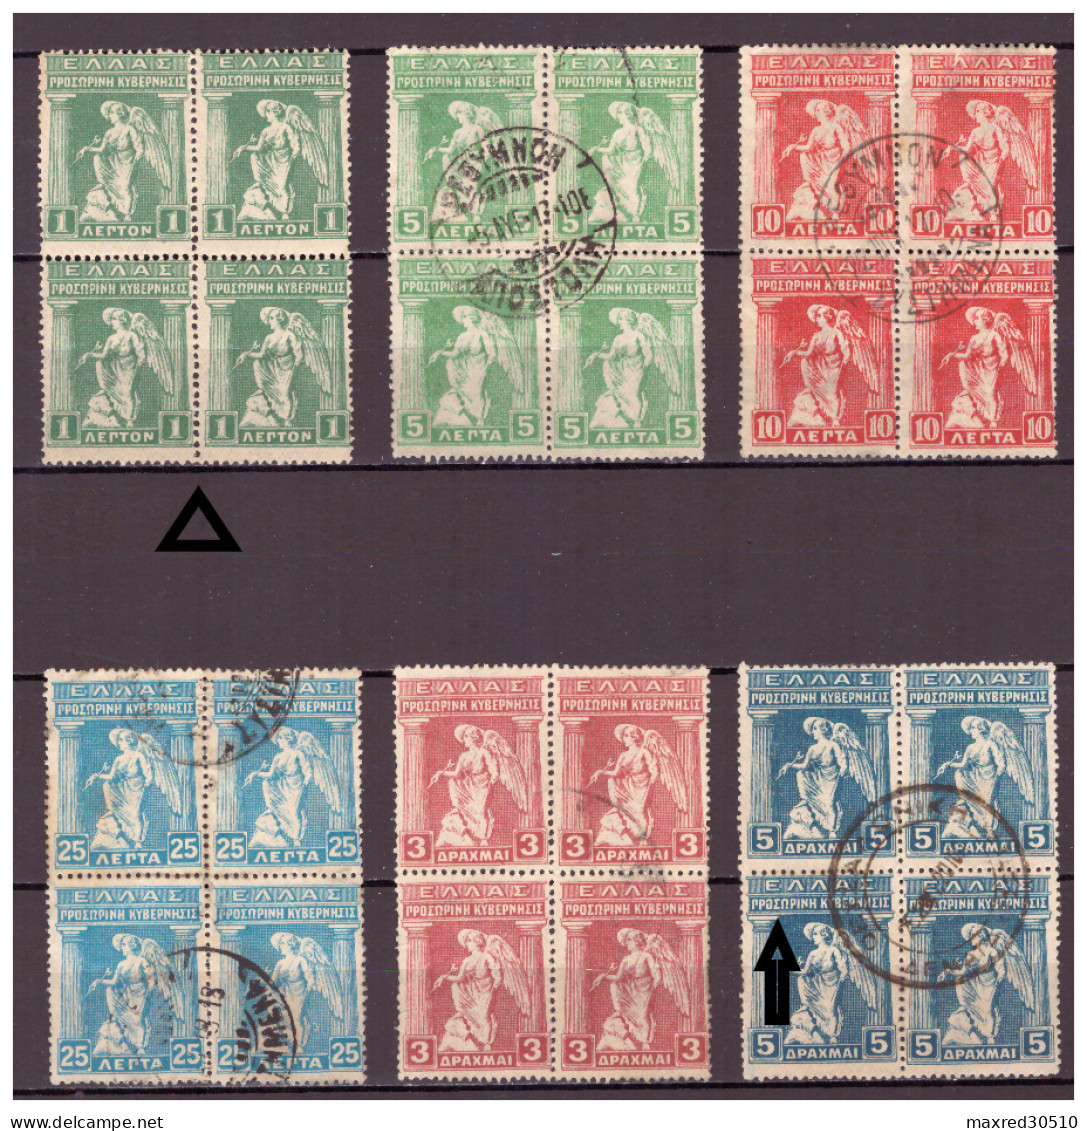 GREECE 1917 6 BLOCKS OF 4 OF THE "PROVISIONAL GOVERNMENT ISSUE", AT THE BL.4 OF 5DR. SEE ARROW AT THE "O", USED - Used Stamps